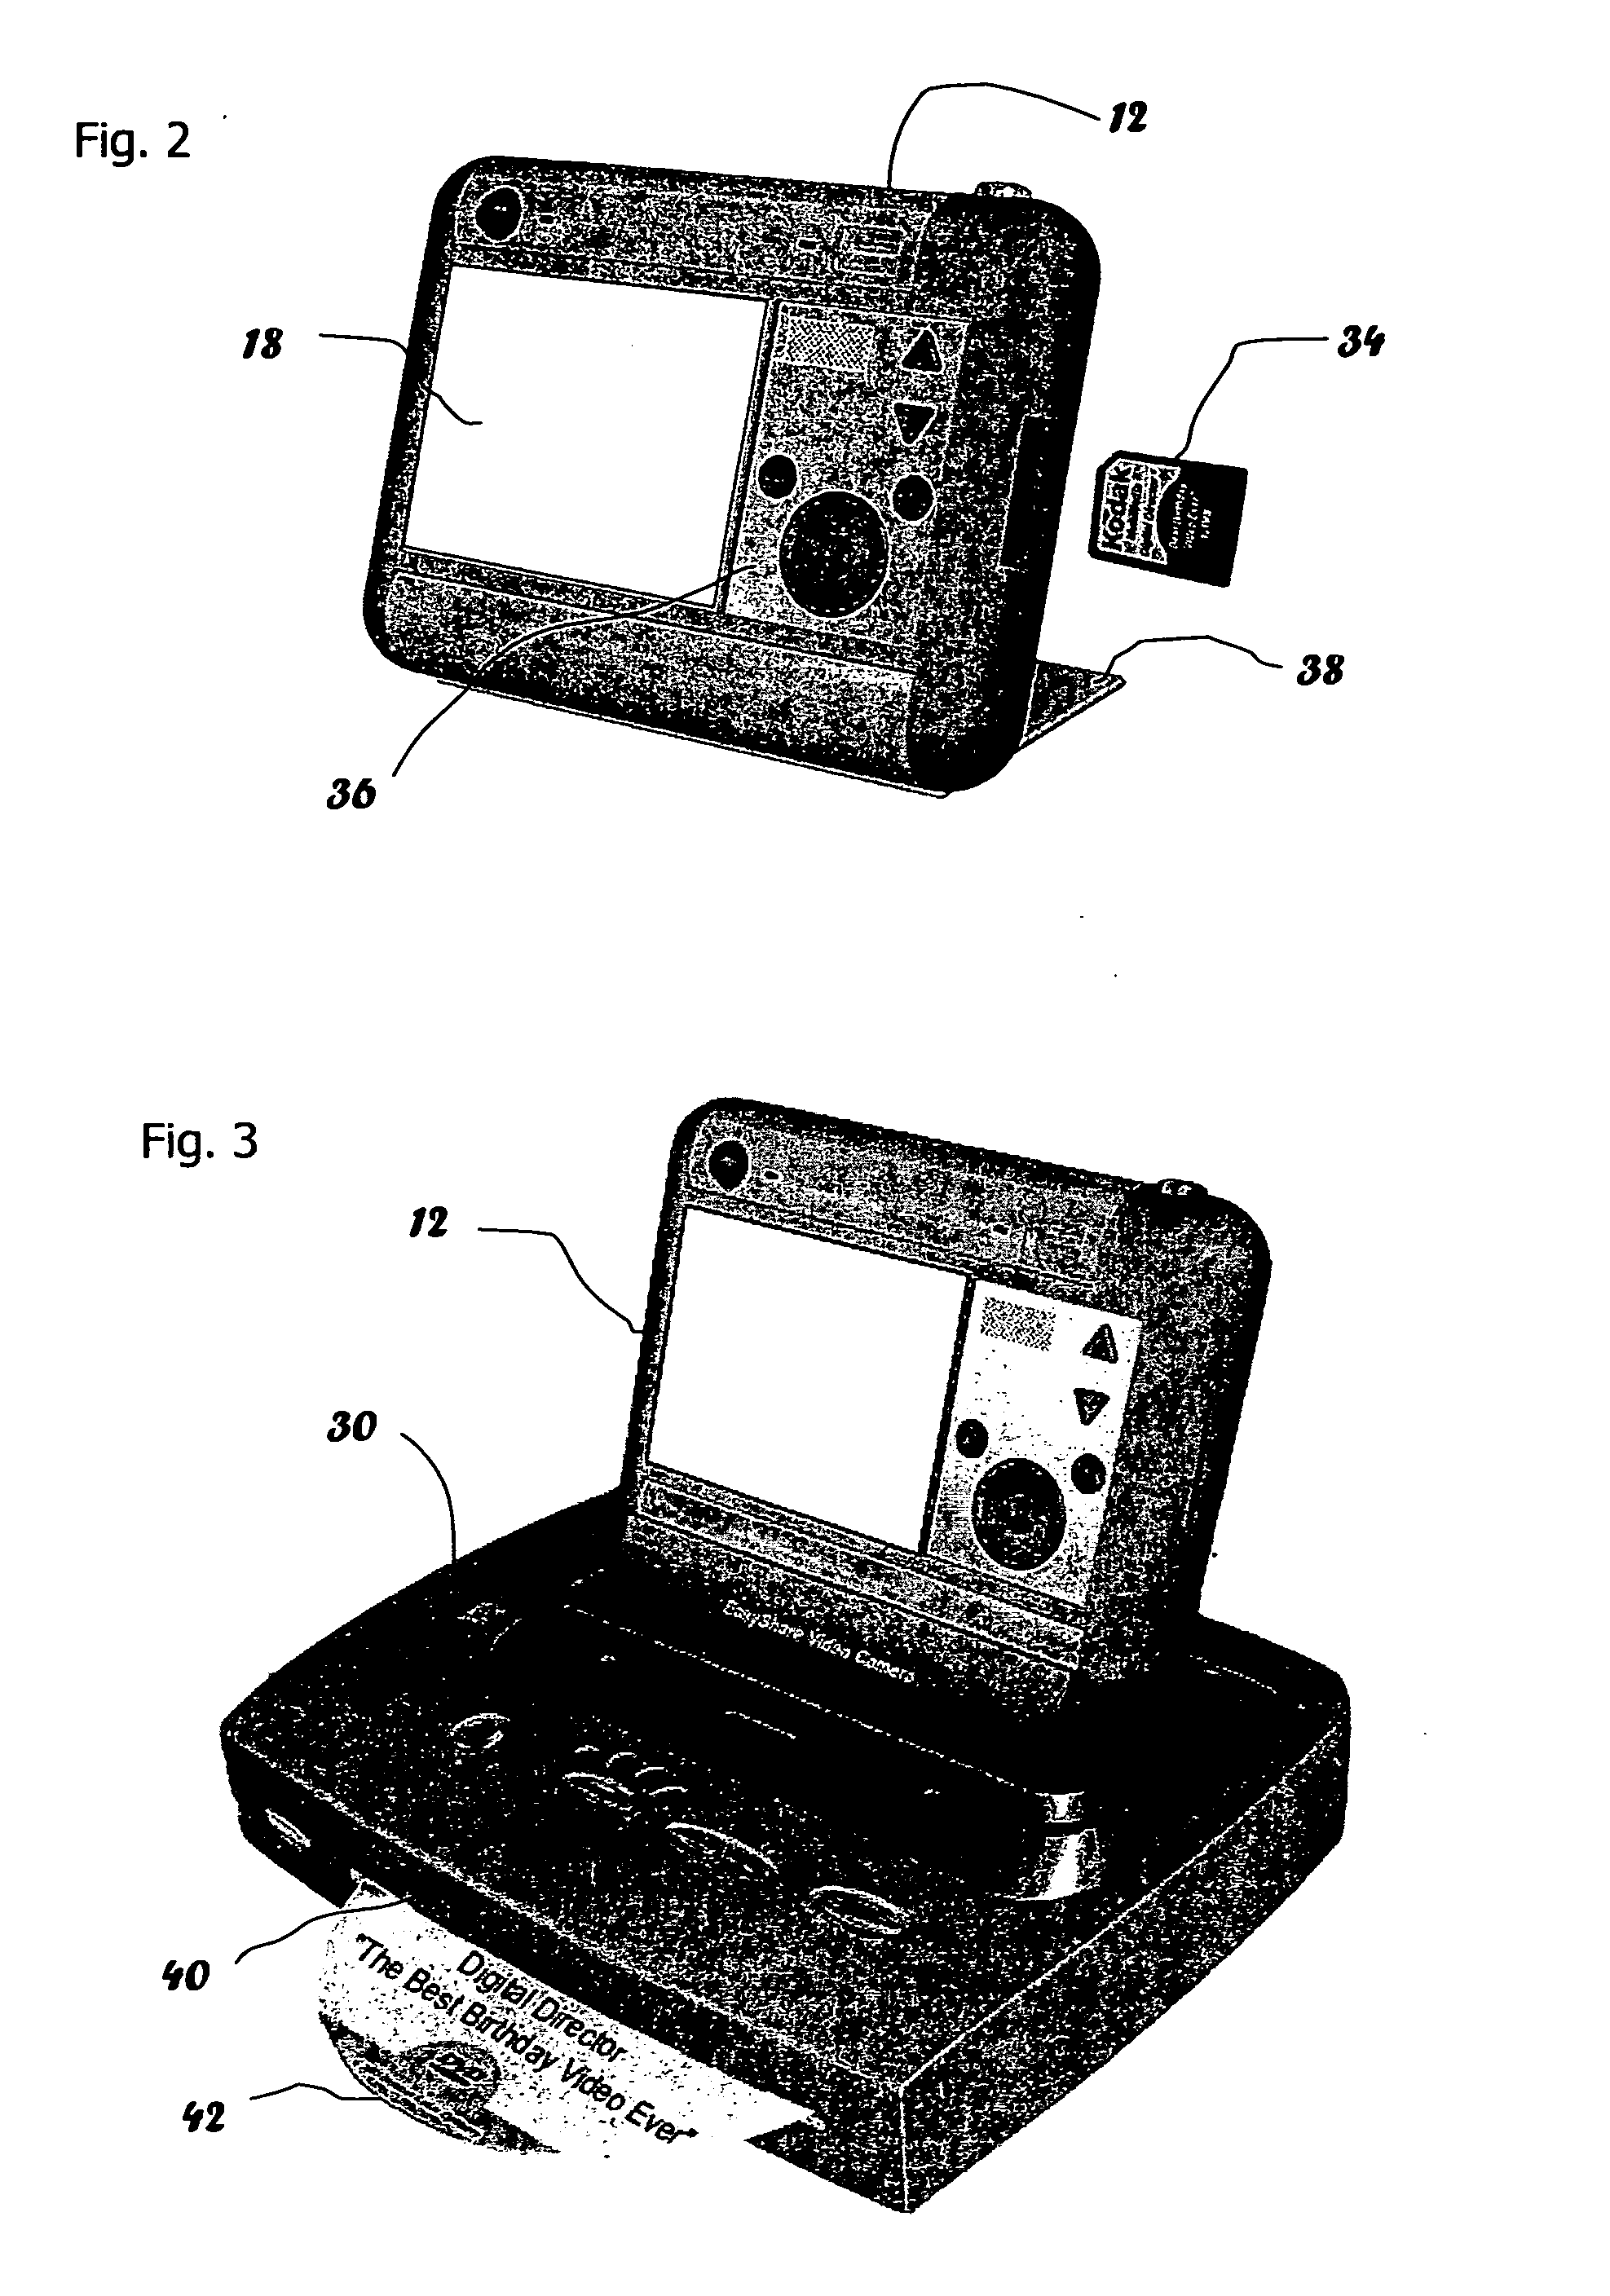 Digital video system for assembling video sequences